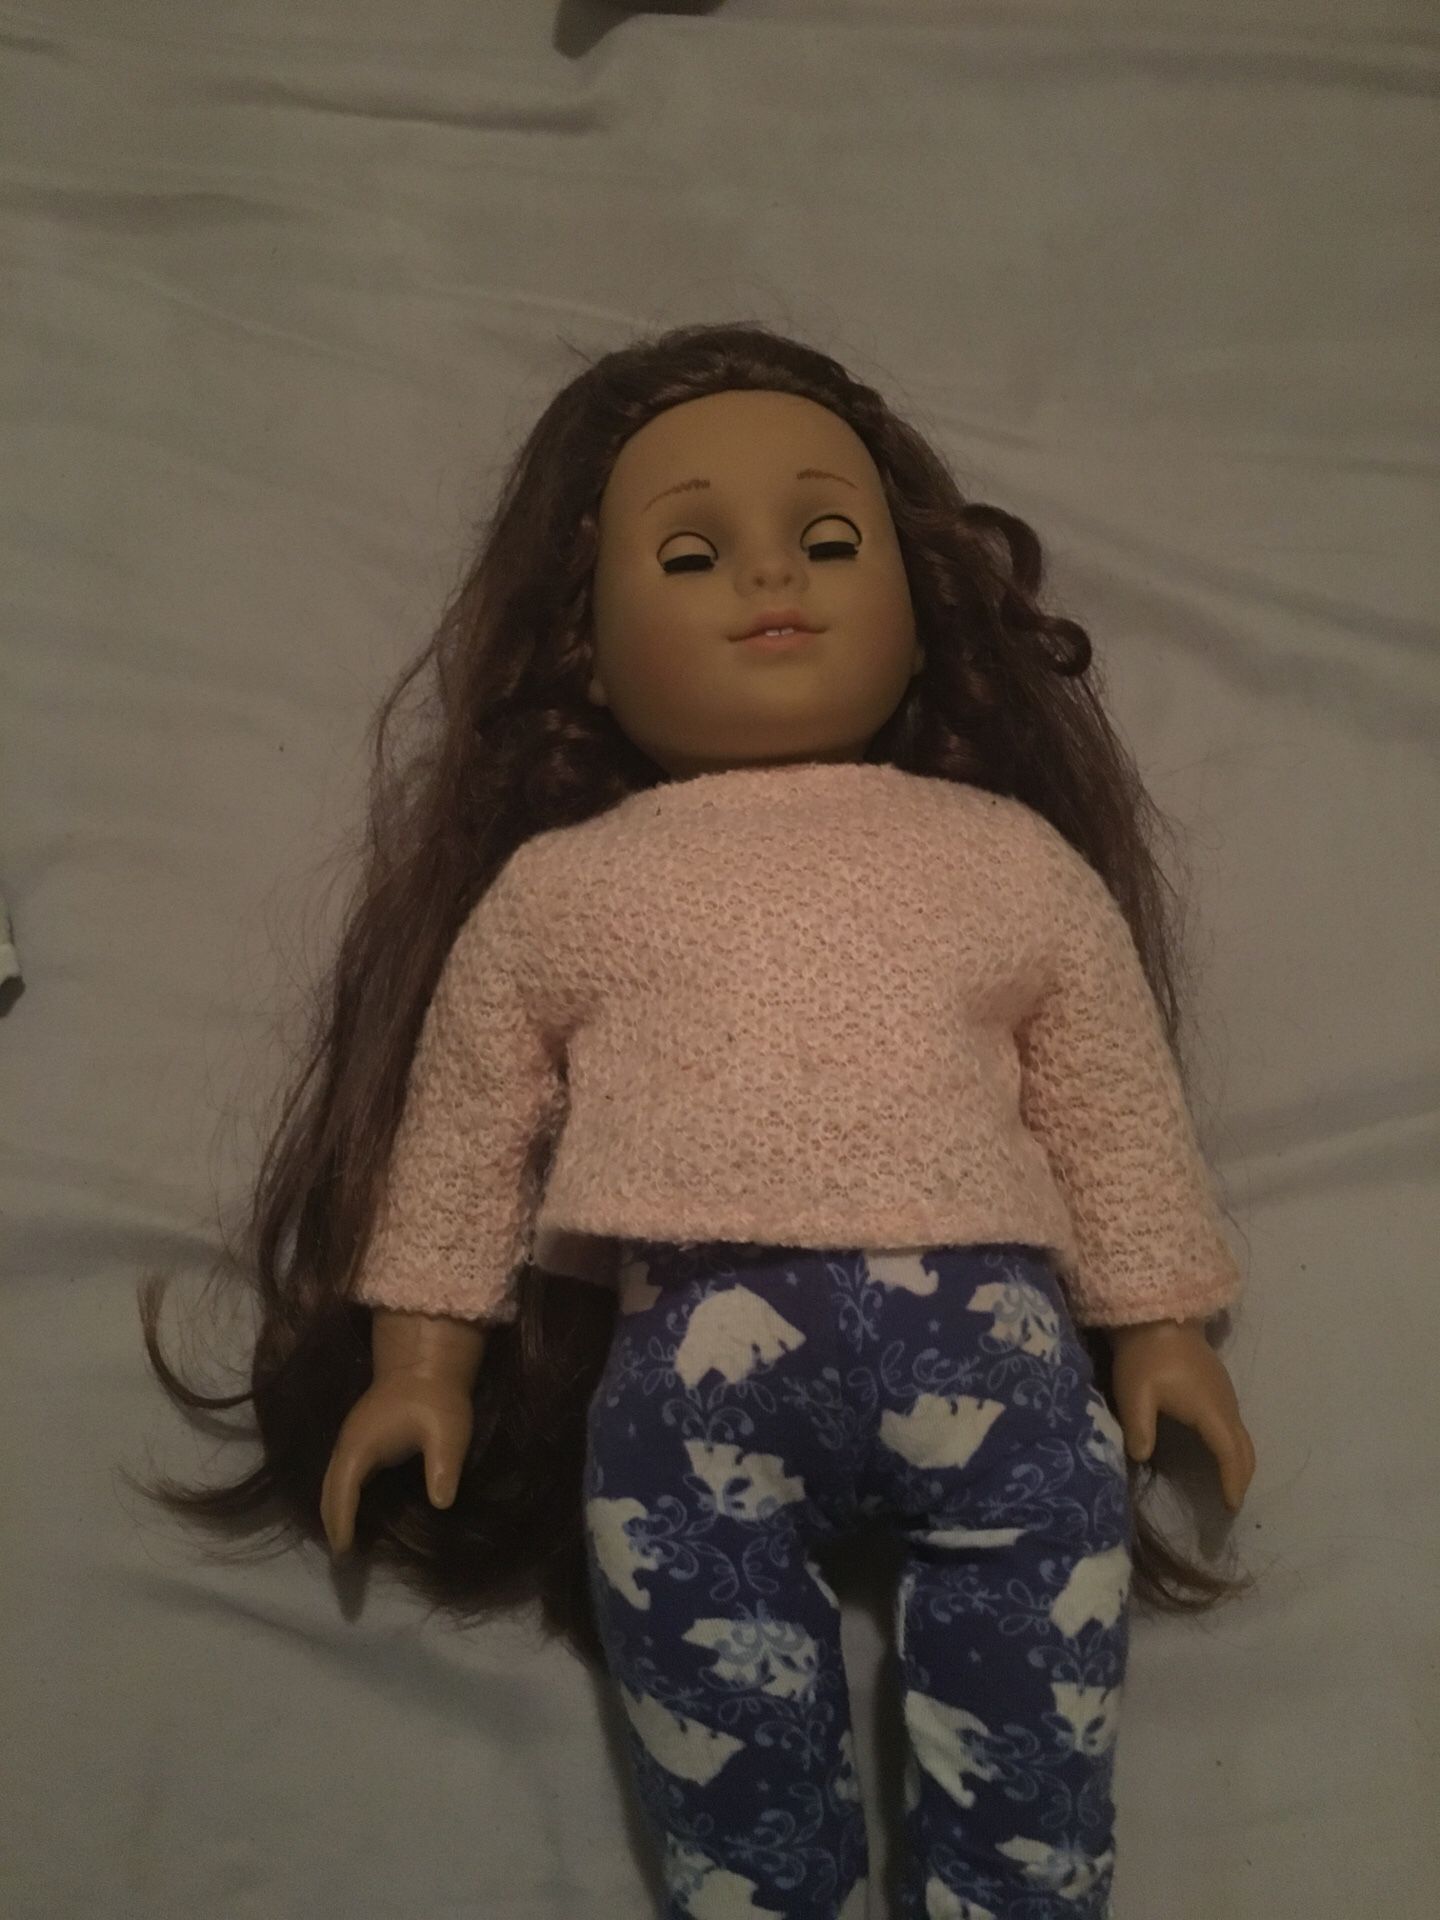 American girl doll(retired) can’t buy in stores!